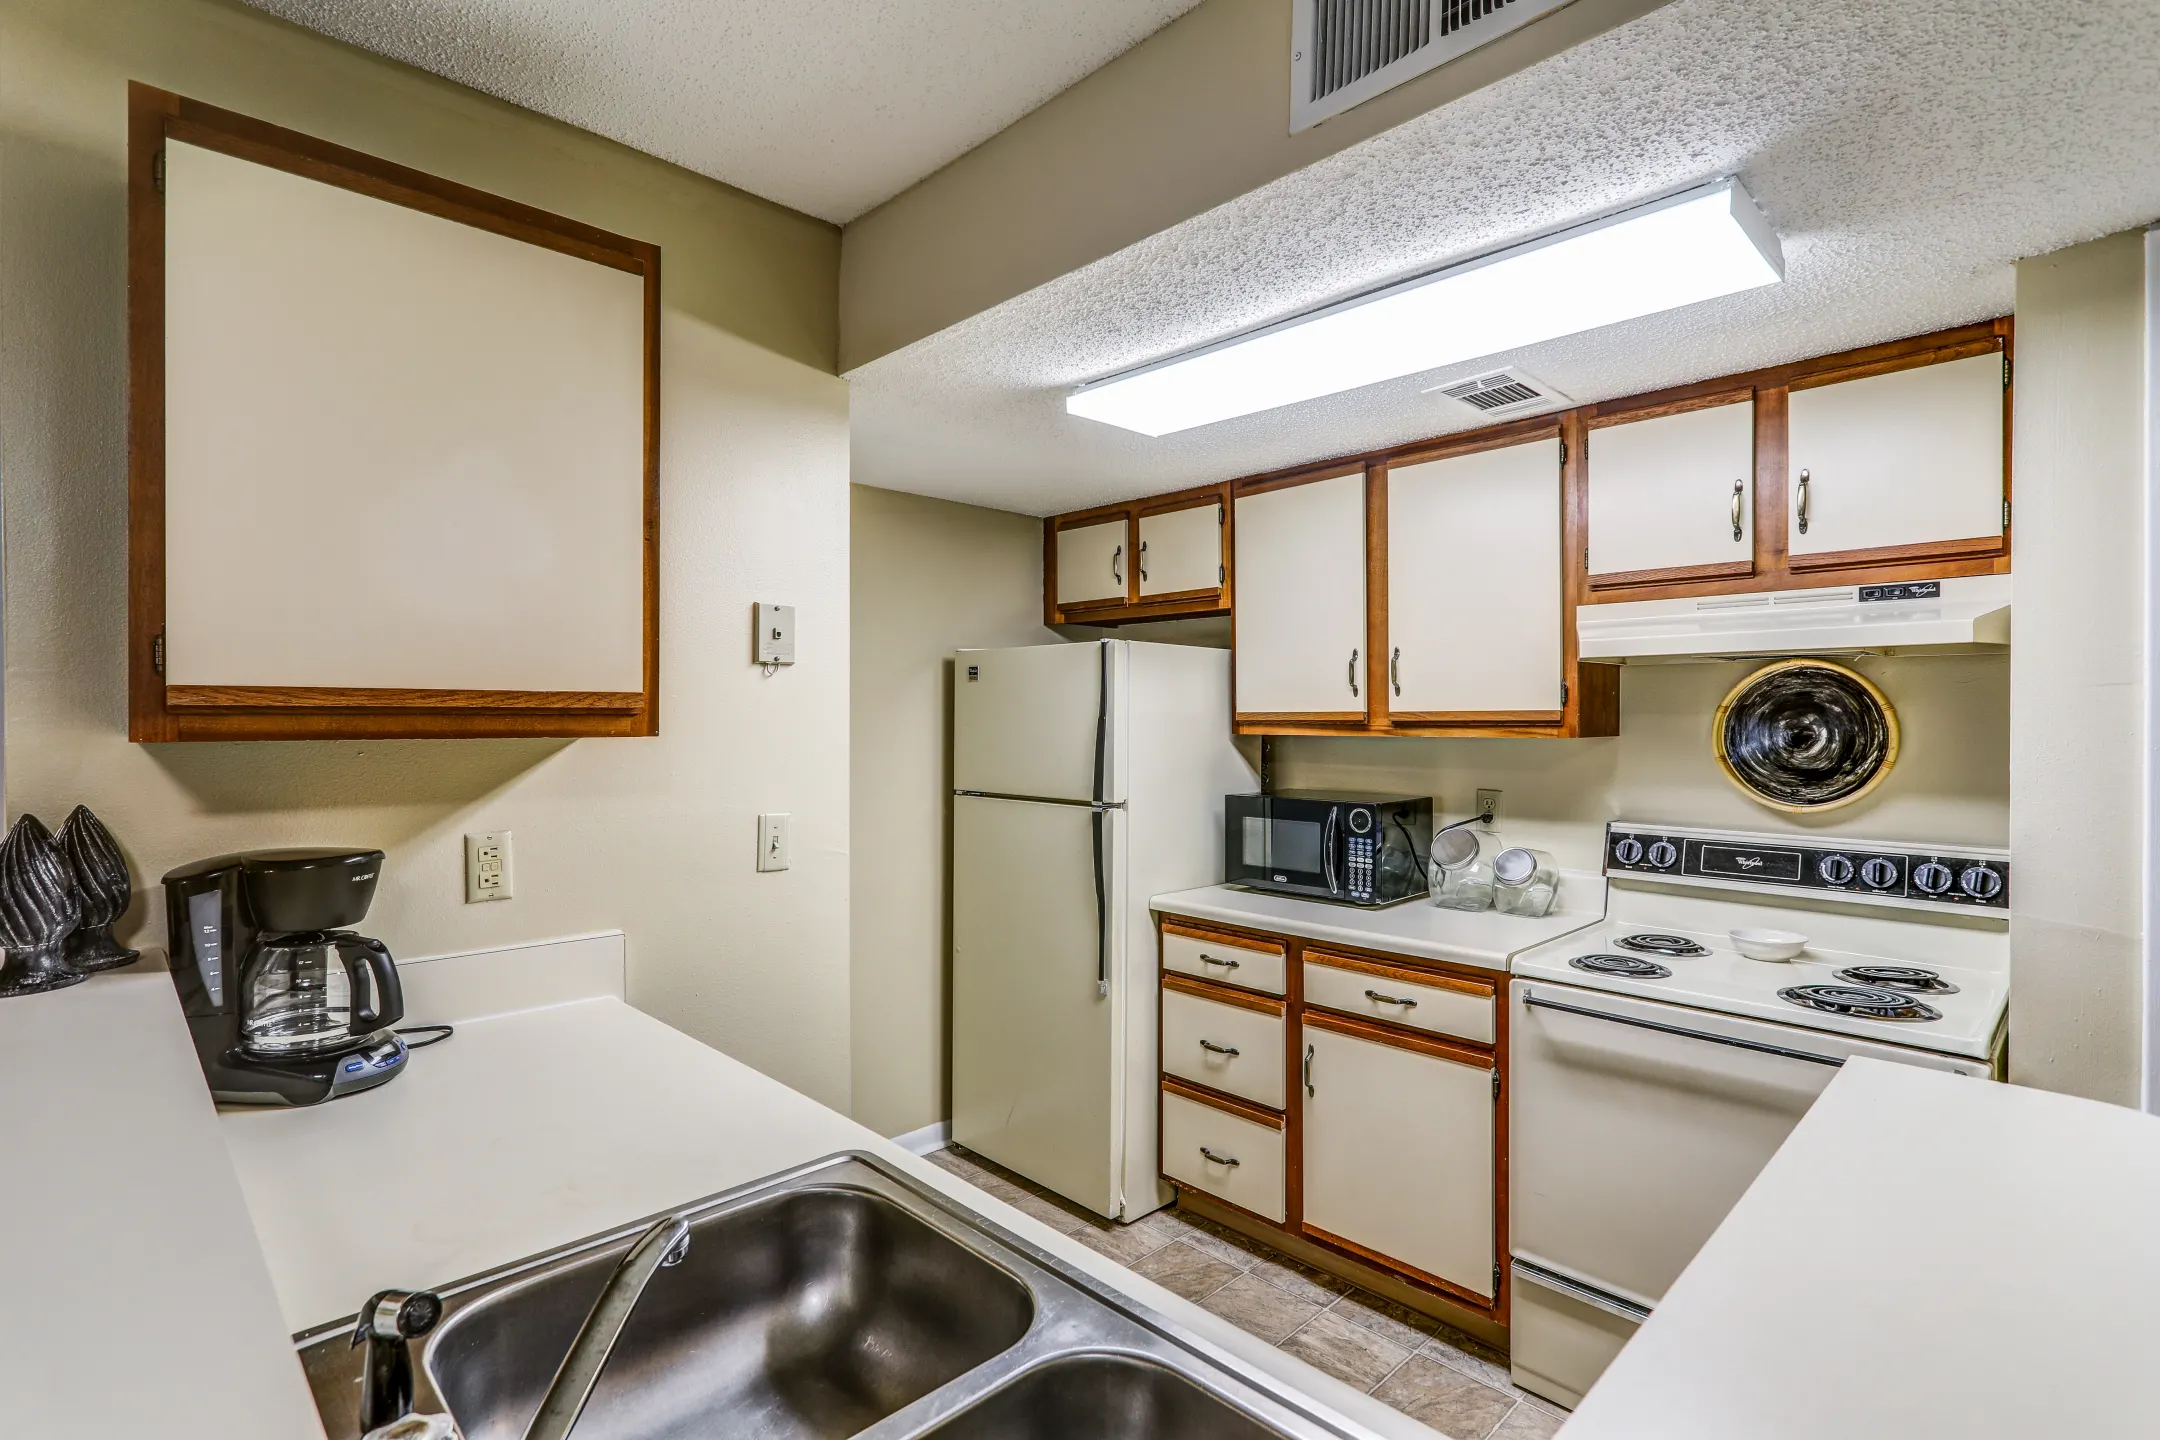 Kitchen - Spring Meadow Apartments - Knoxville, TN